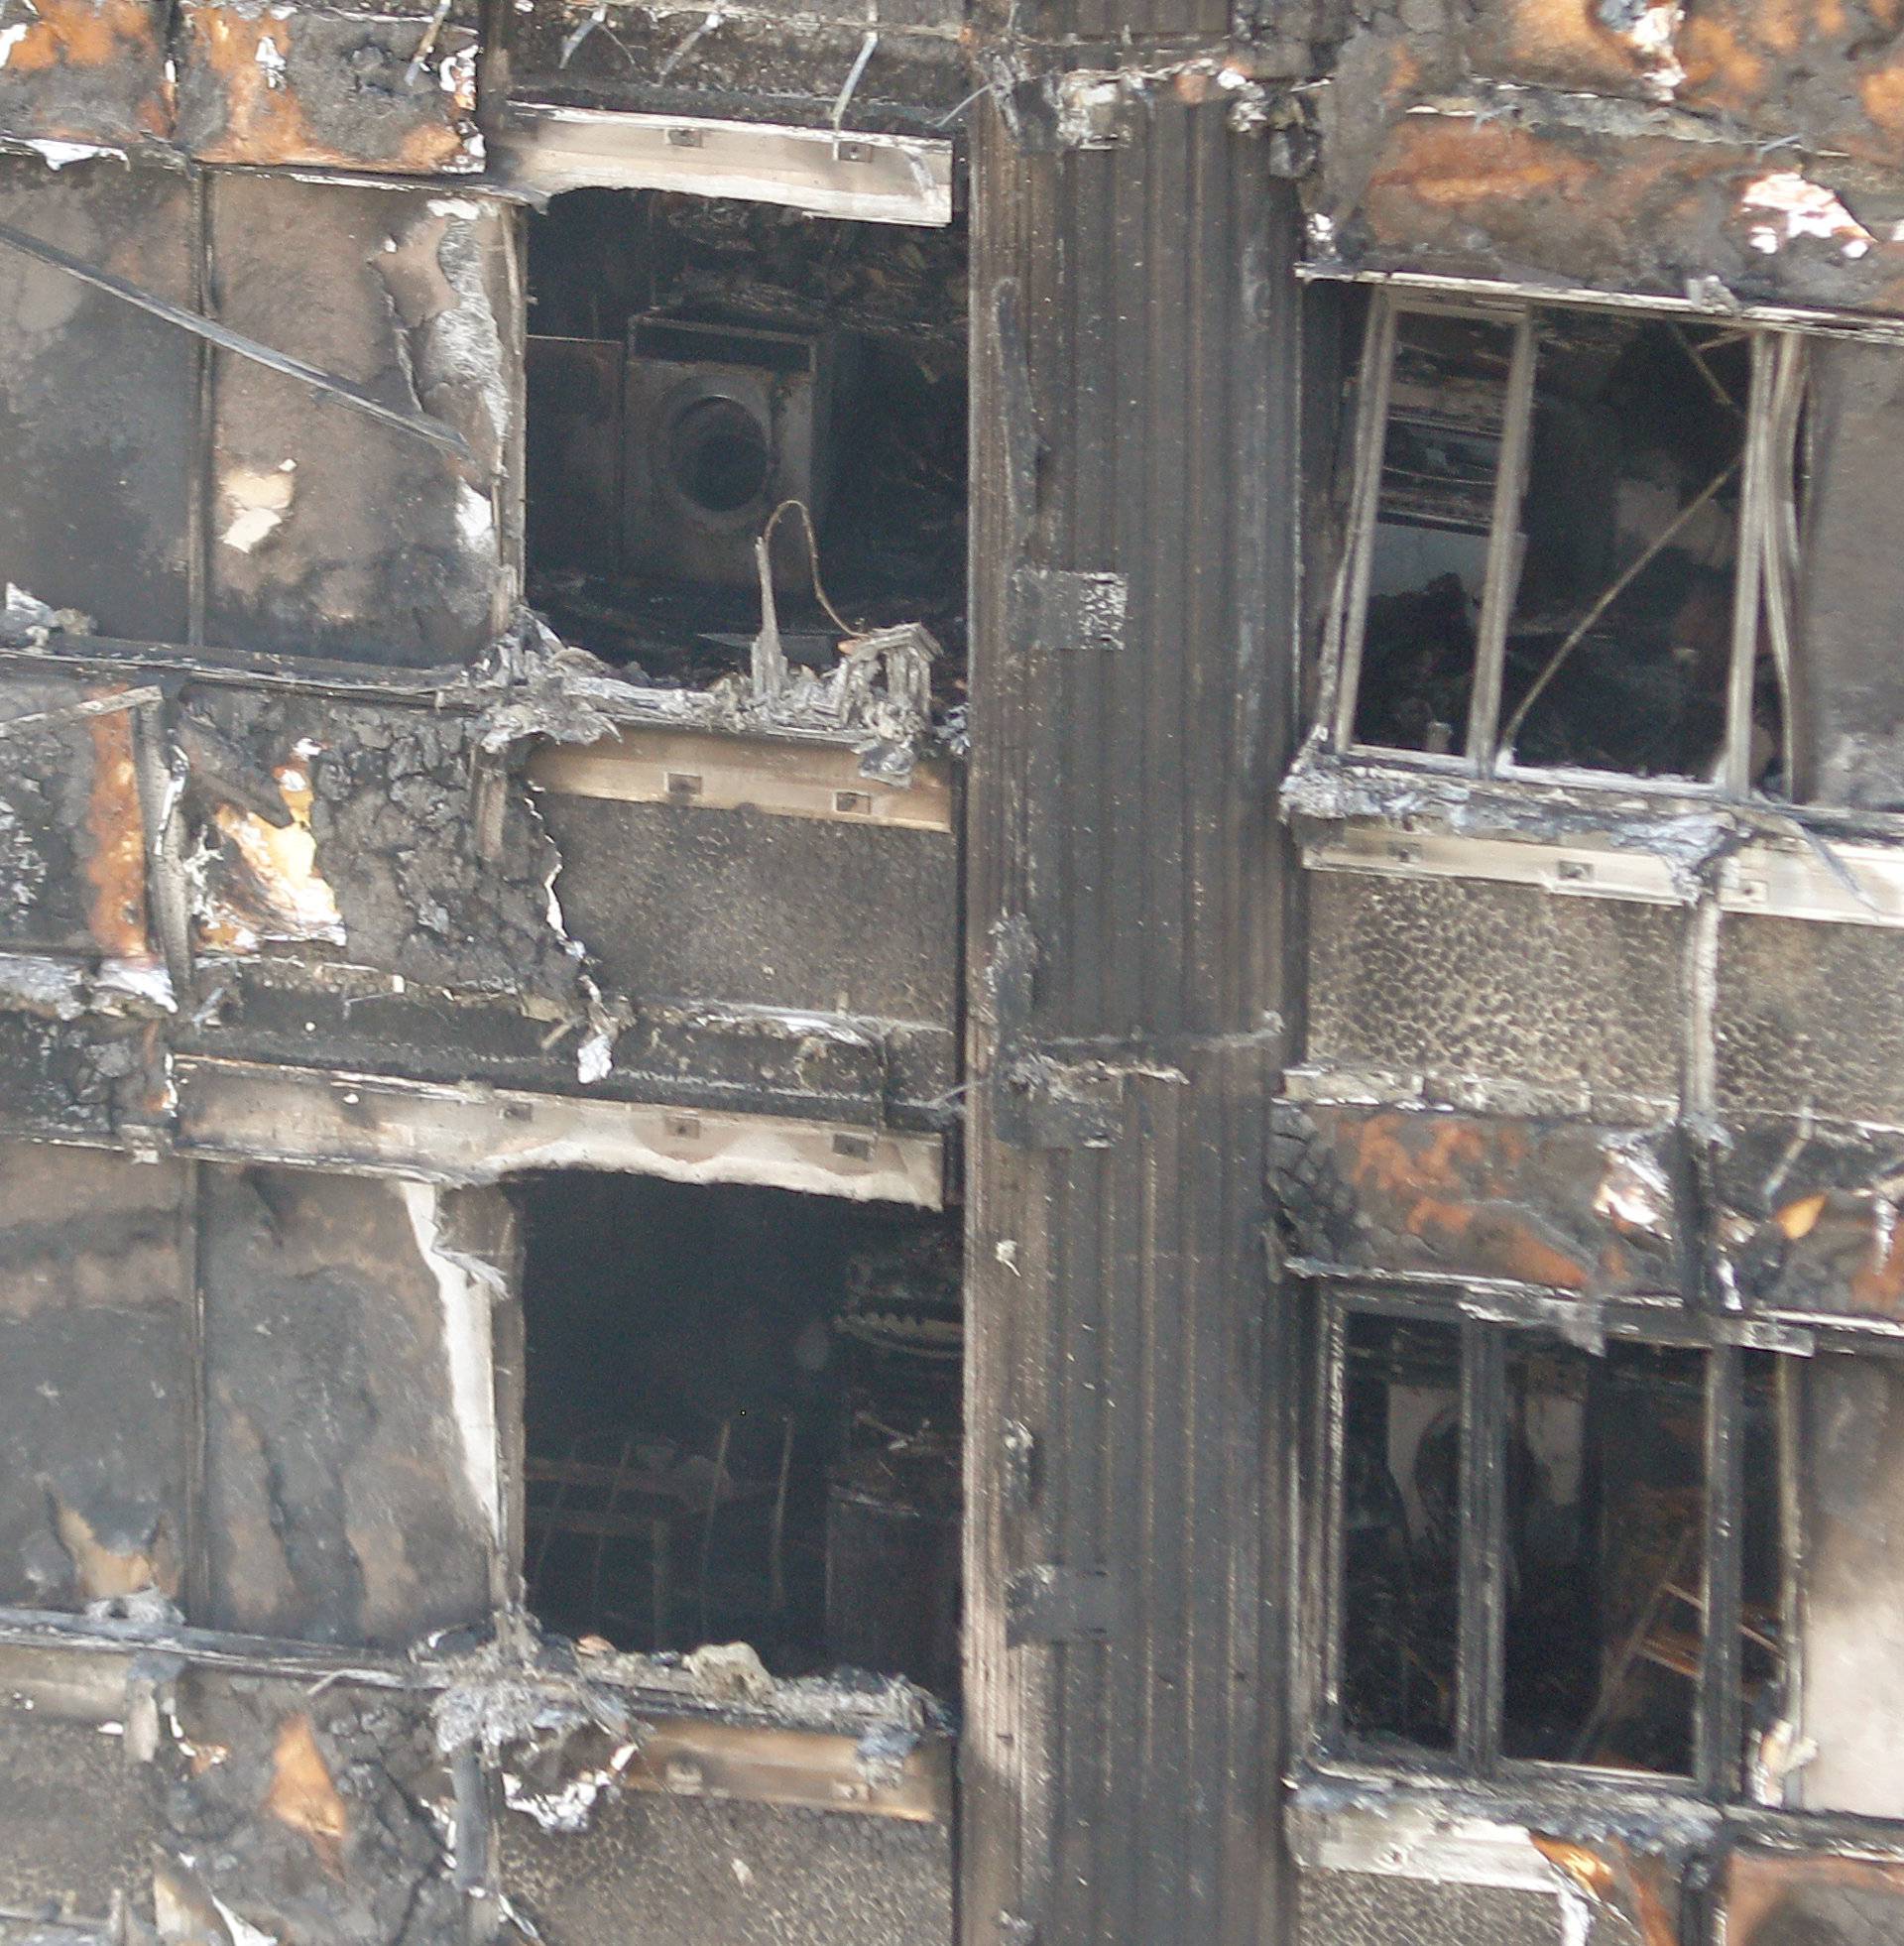 The extensive damage is seen to the Grenfell Tower block that was destroyed in a fire disaster, in north Kensington, West London